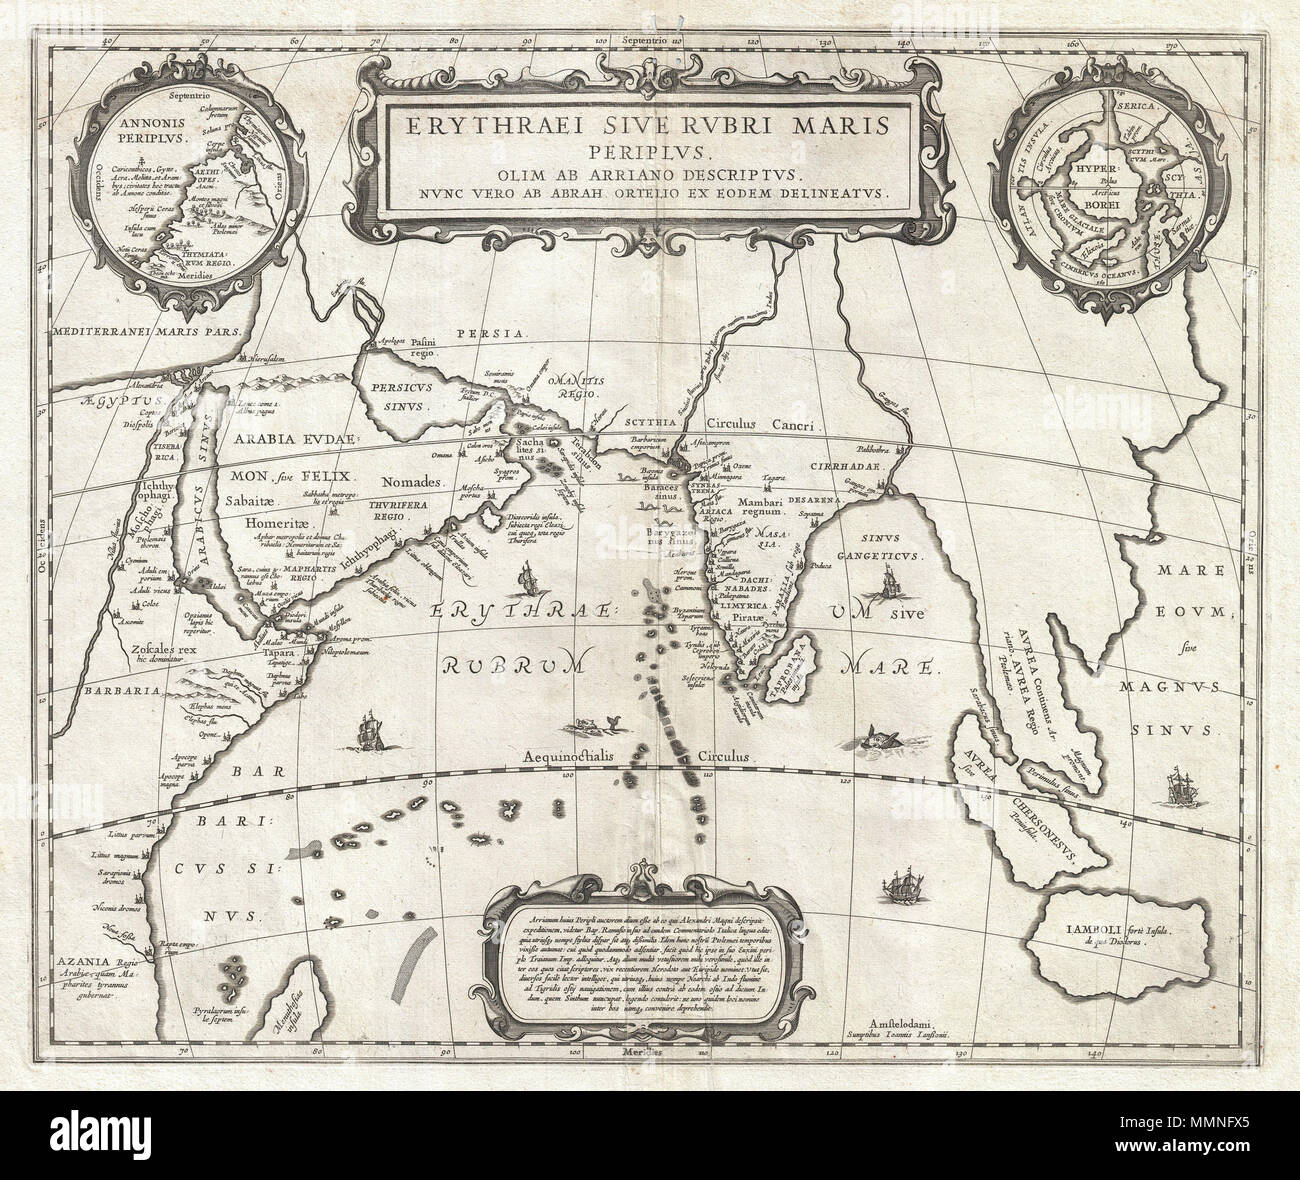 .  English: An unusual and attractive 1658 map of the Indian Ocean, or Erythraean Sea, as it was in antiquity. Composed by Jan Jansson after a similar 1597 map published by A. Ortelius in his Parergon . Covers from Egypt and the Nile valley eastward past Arabia and India, to Southeast Asia and Java. Cartographically, India, Arabia, and Africa roughly correspond to the conventions of the period. Southeast Asia is less recognizable, but the Malay Peninsula, Sumatra, and Java are clearly noted. Most of the place names used throughout are derived from Ptolemy, who himself based his description of  Stock Photo